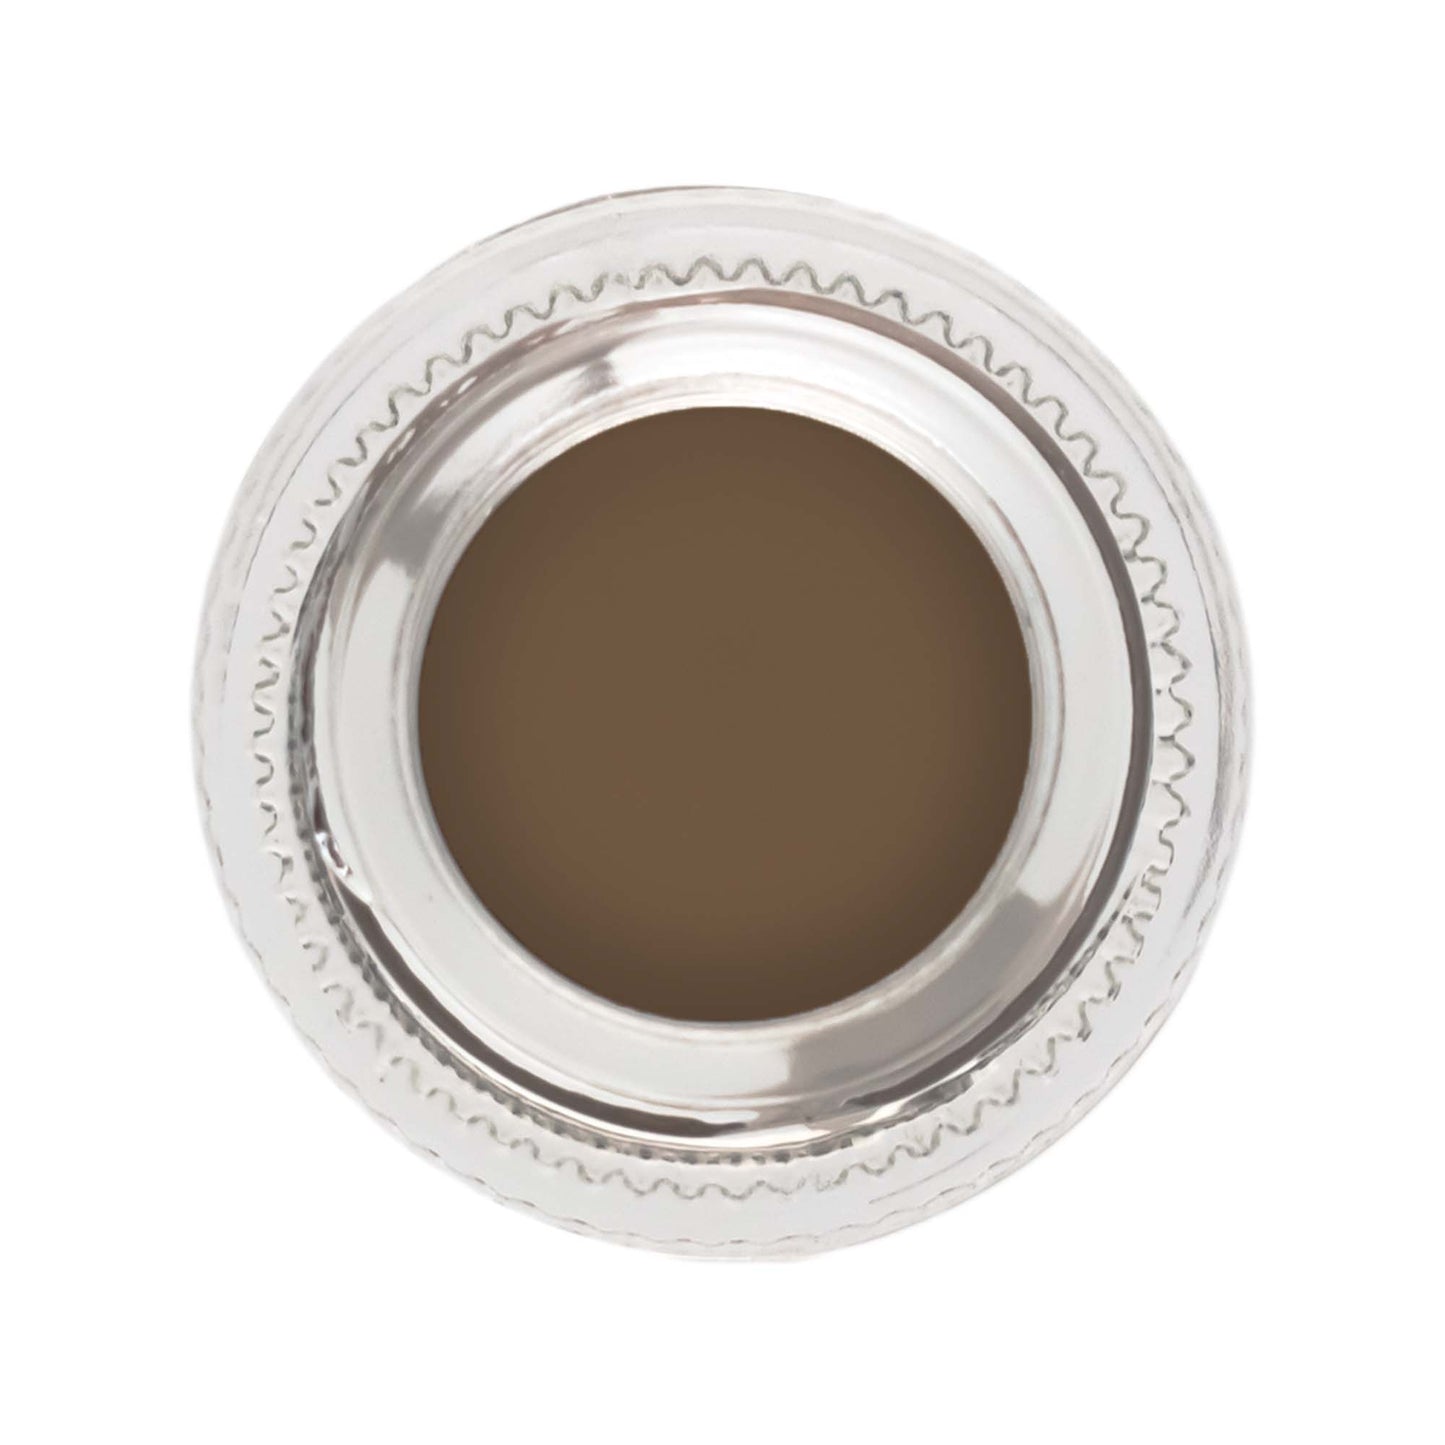 Sculpt, shape, and fill your brows with Cruisin Organics Tiramisu Brow Pomade's versatile formula. Perfect for oily skin, it provides lasting control and a polished look.